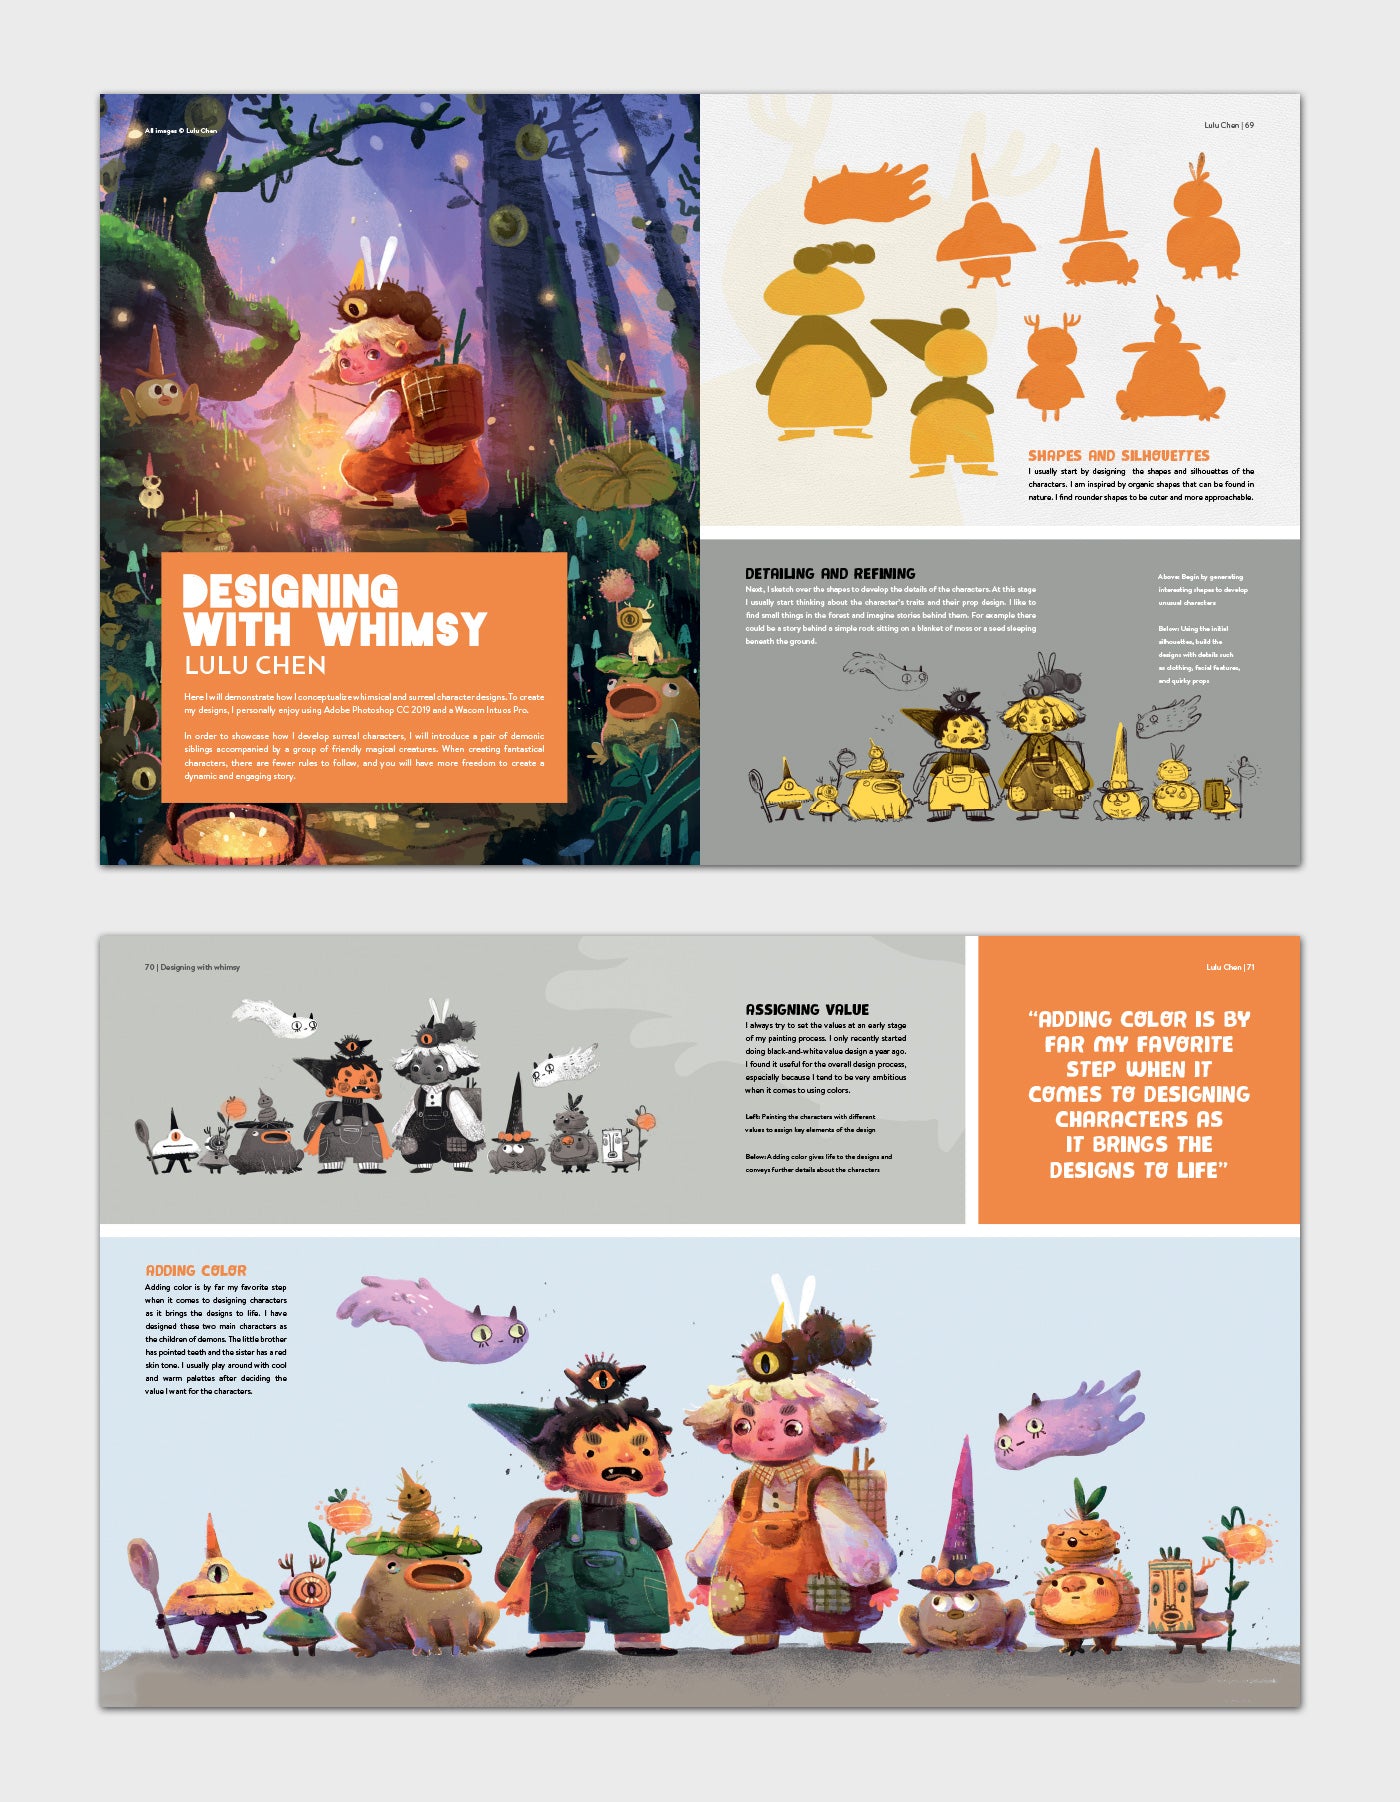 Character Design Quarterly issue 09 (Downloadable Edition)